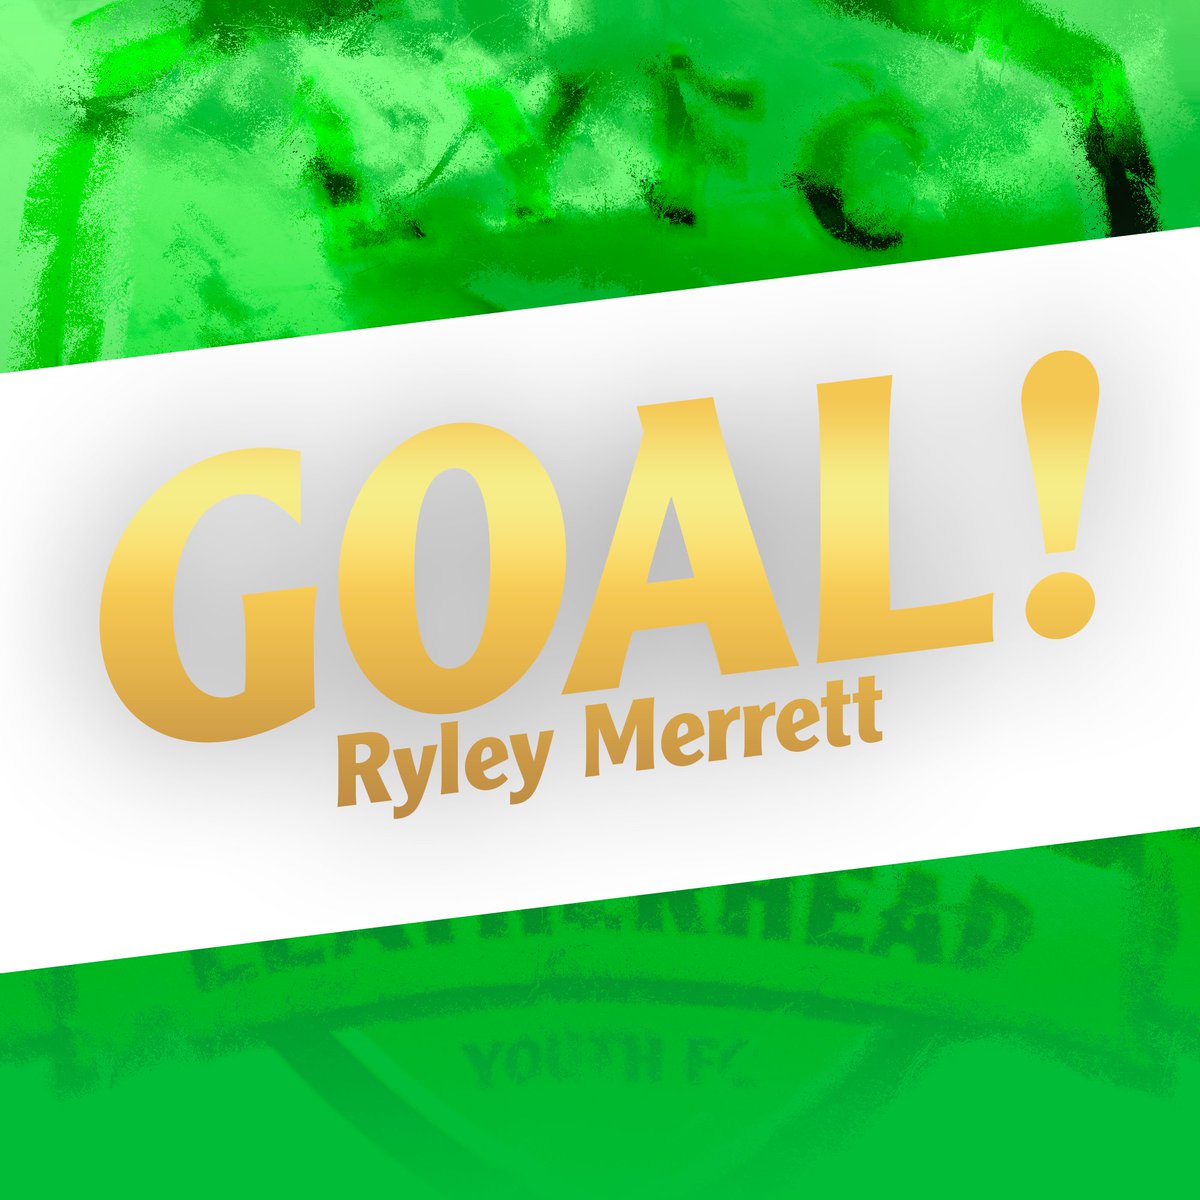 THE GOALS AREN'T STOPPING AT 10! Ryley doubles his tally! 11-0